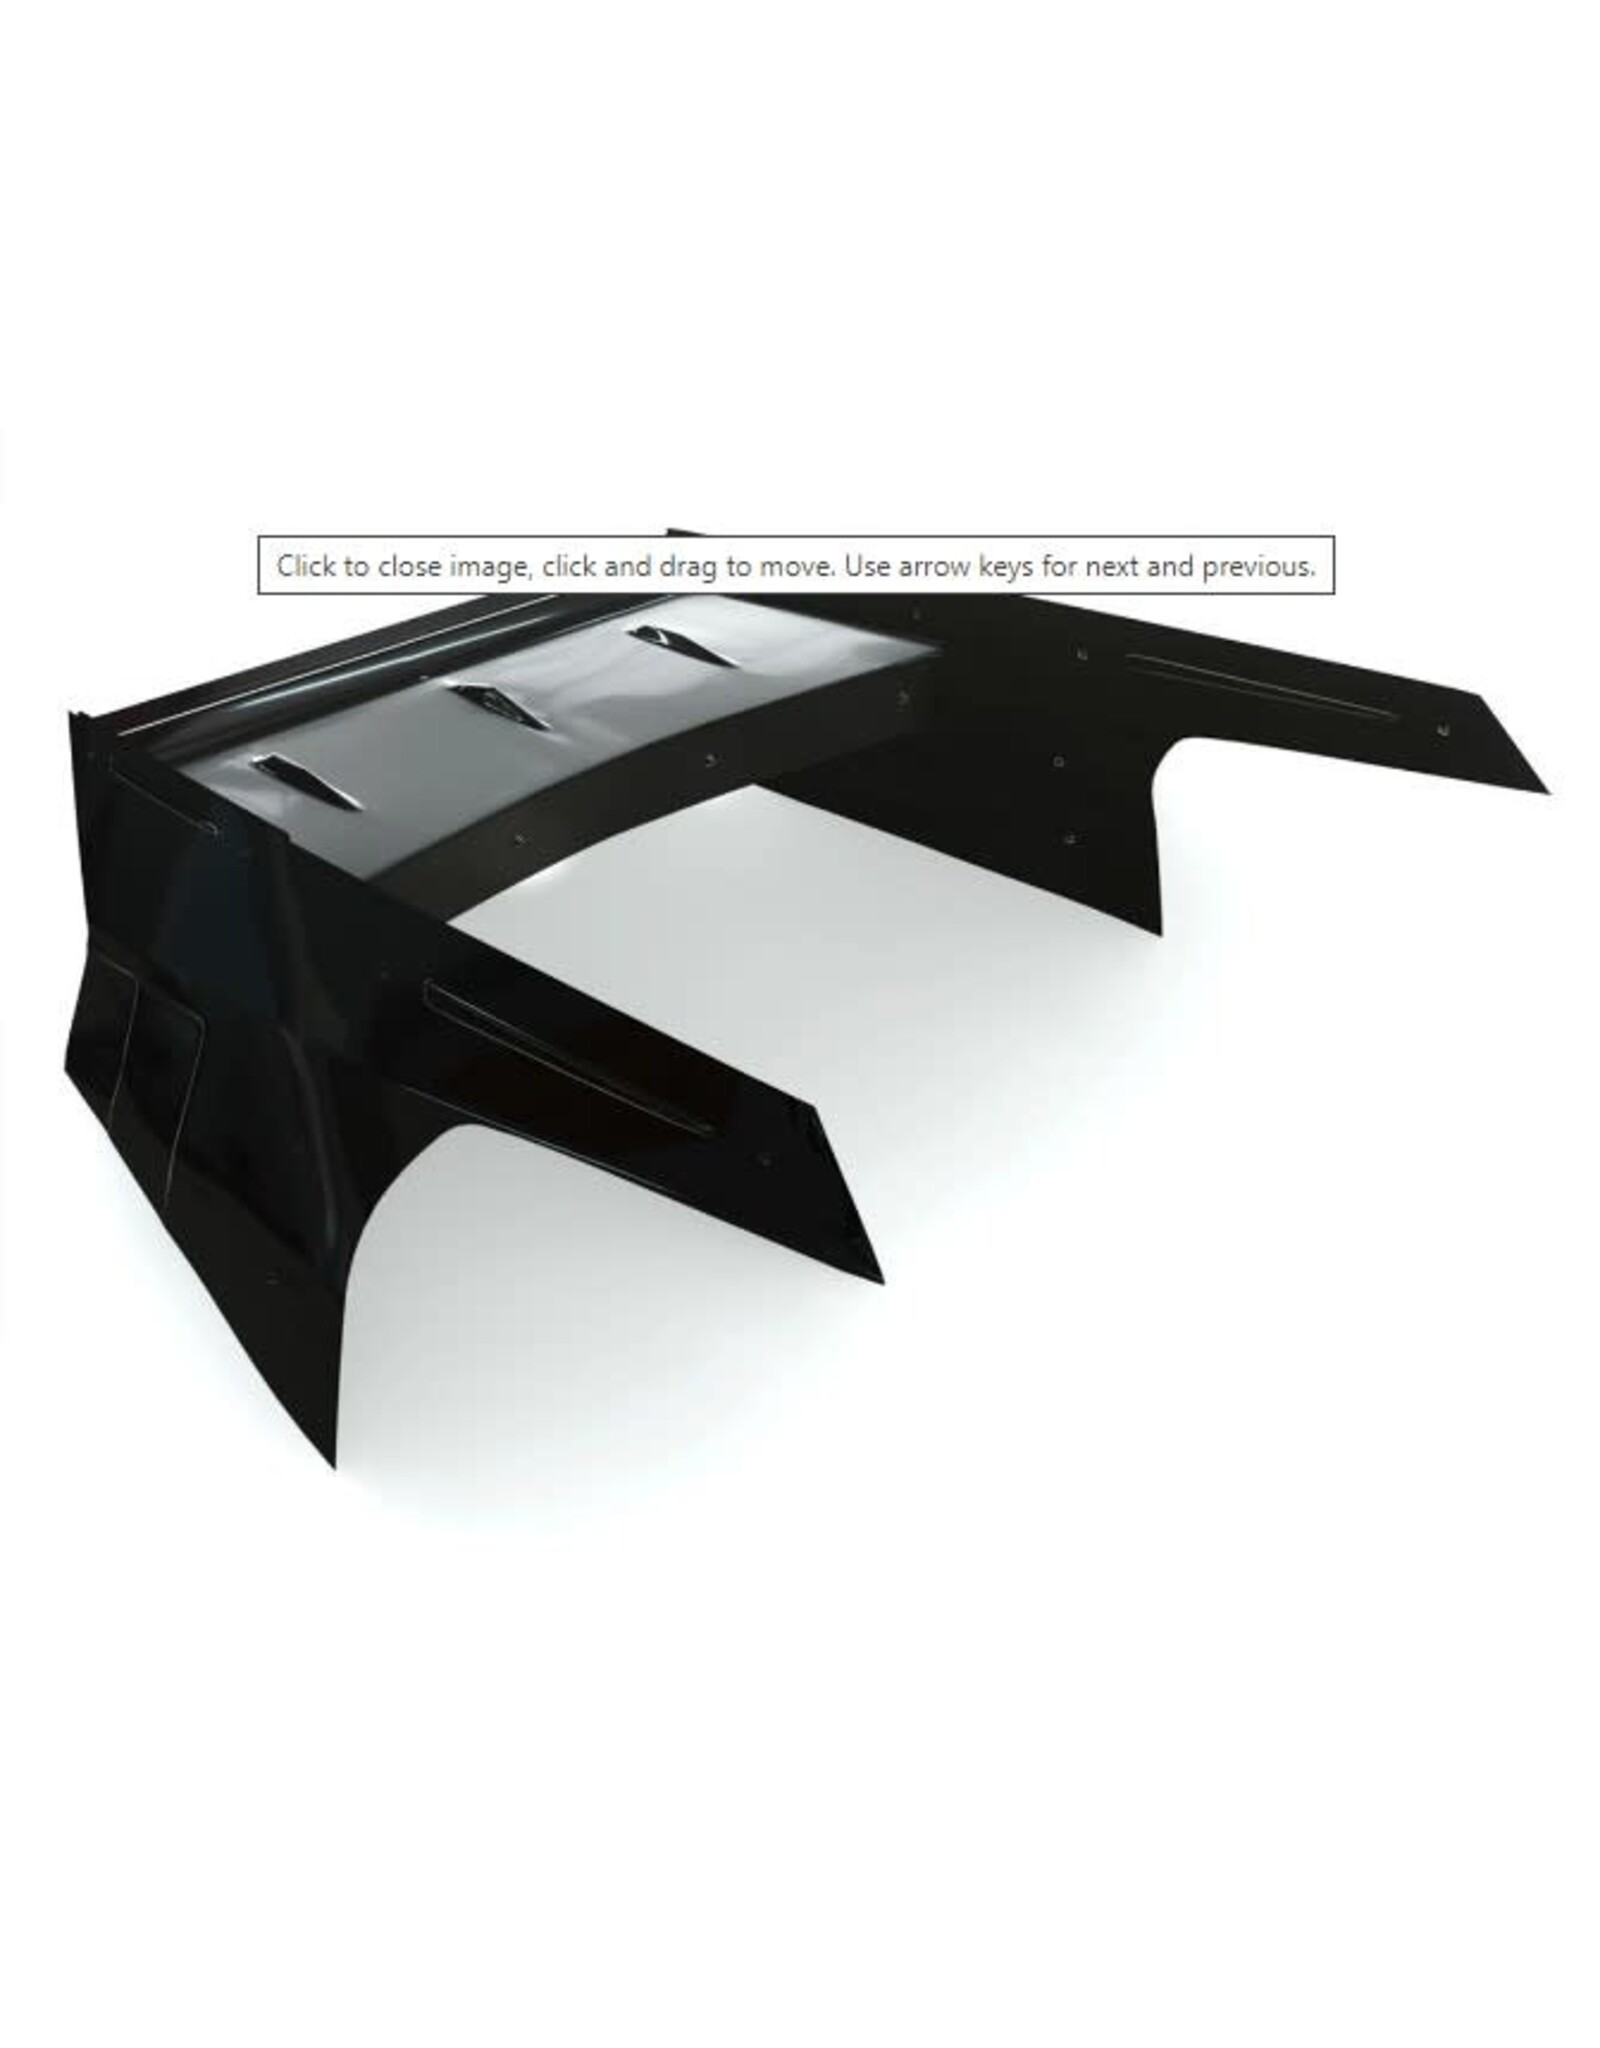 Bittydesign ZL21 Pro Drag Racing Wing Set (Clear)